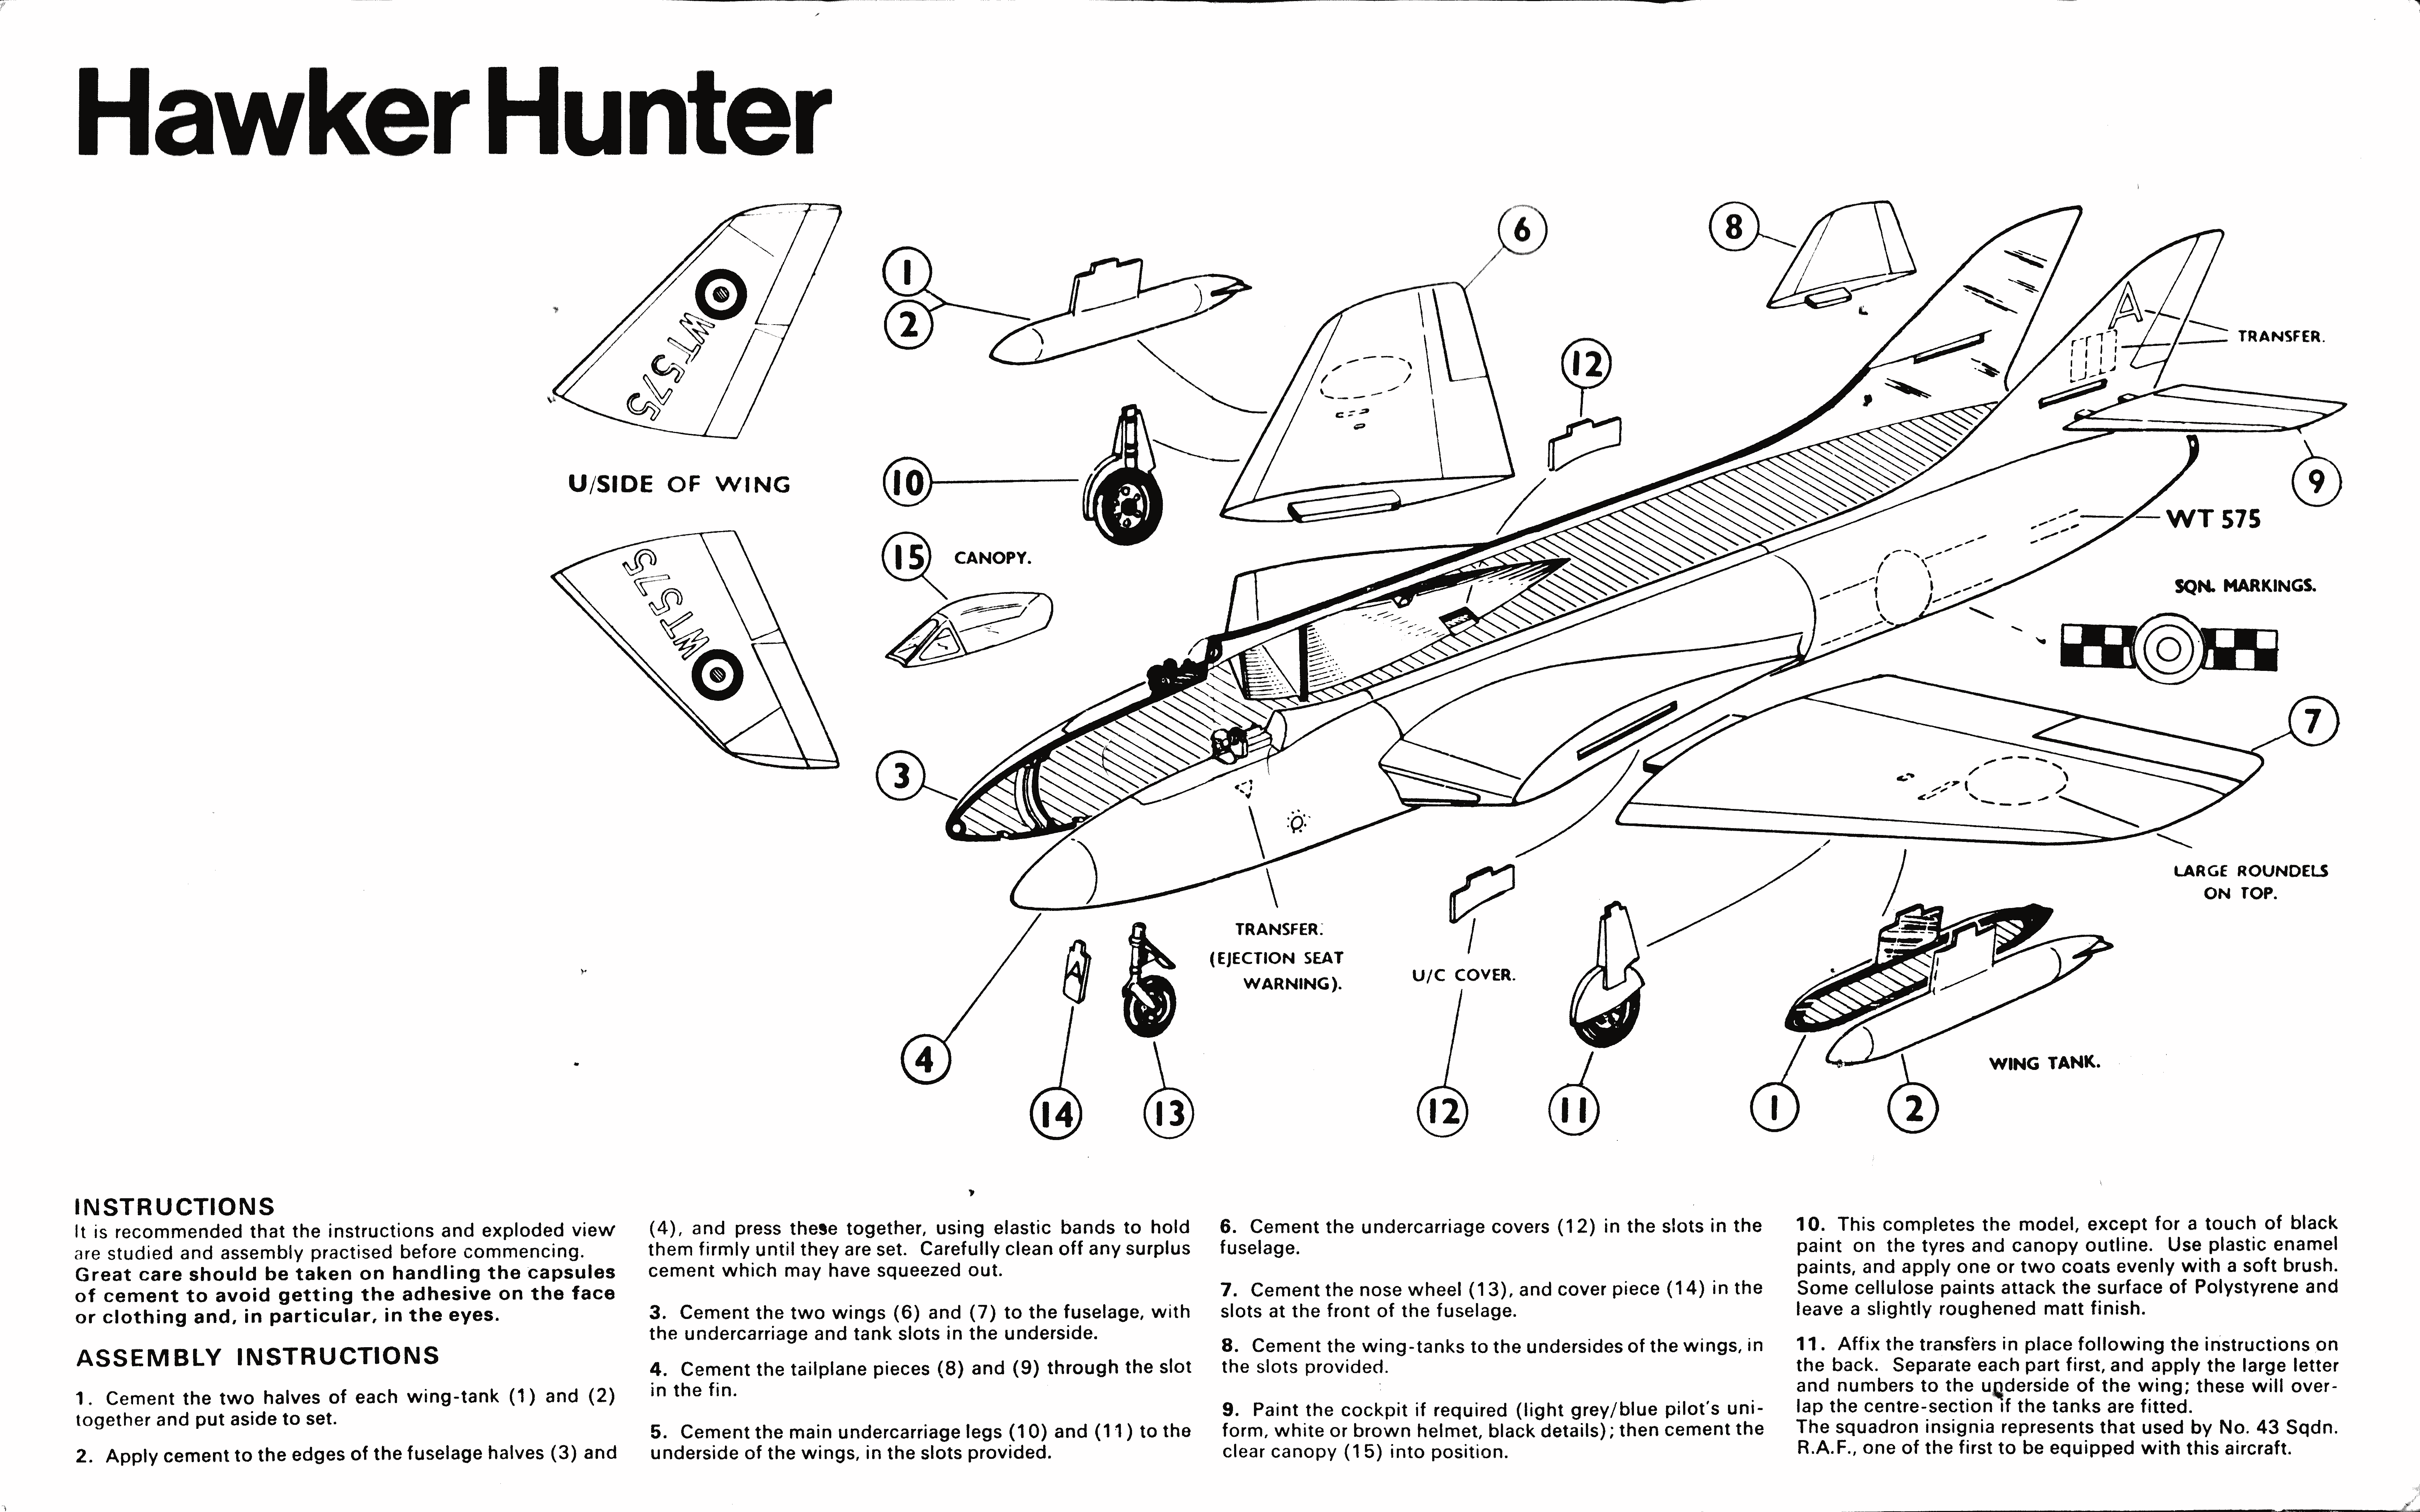 Rovex W34 Hawker Hunter F1 assembly instructions, 1968